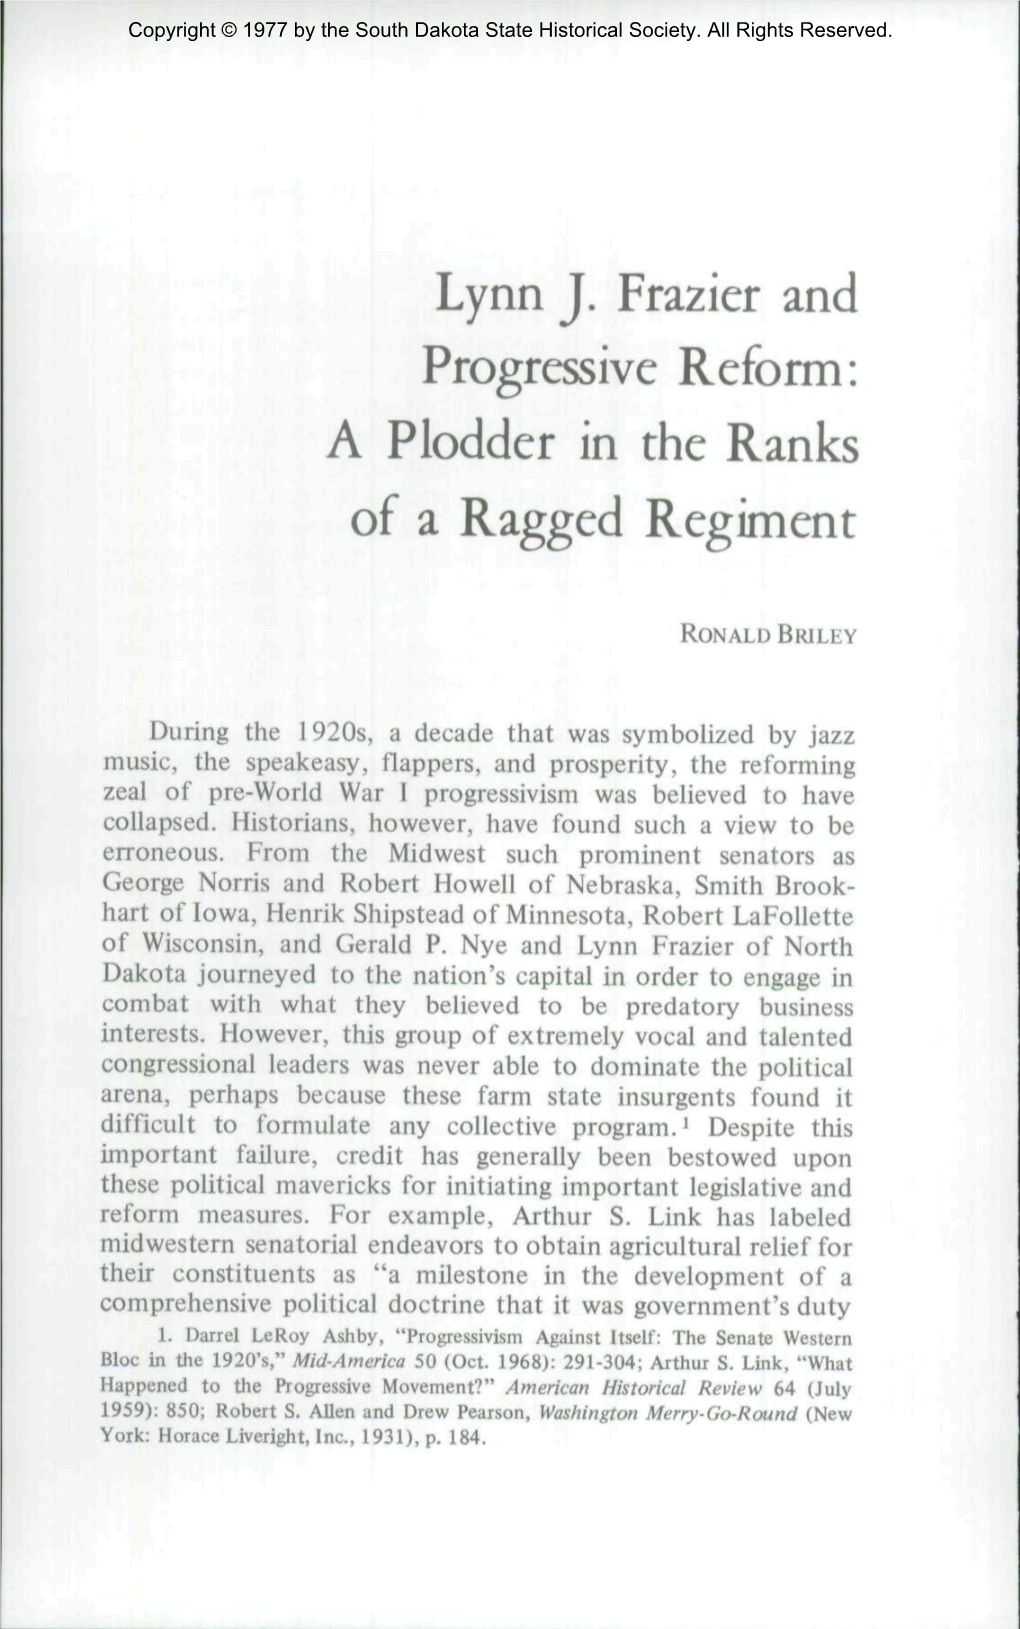 Lynn J. Frazier and Progressive Reform: a Plodder in the Ranks of a Ragged Regiment